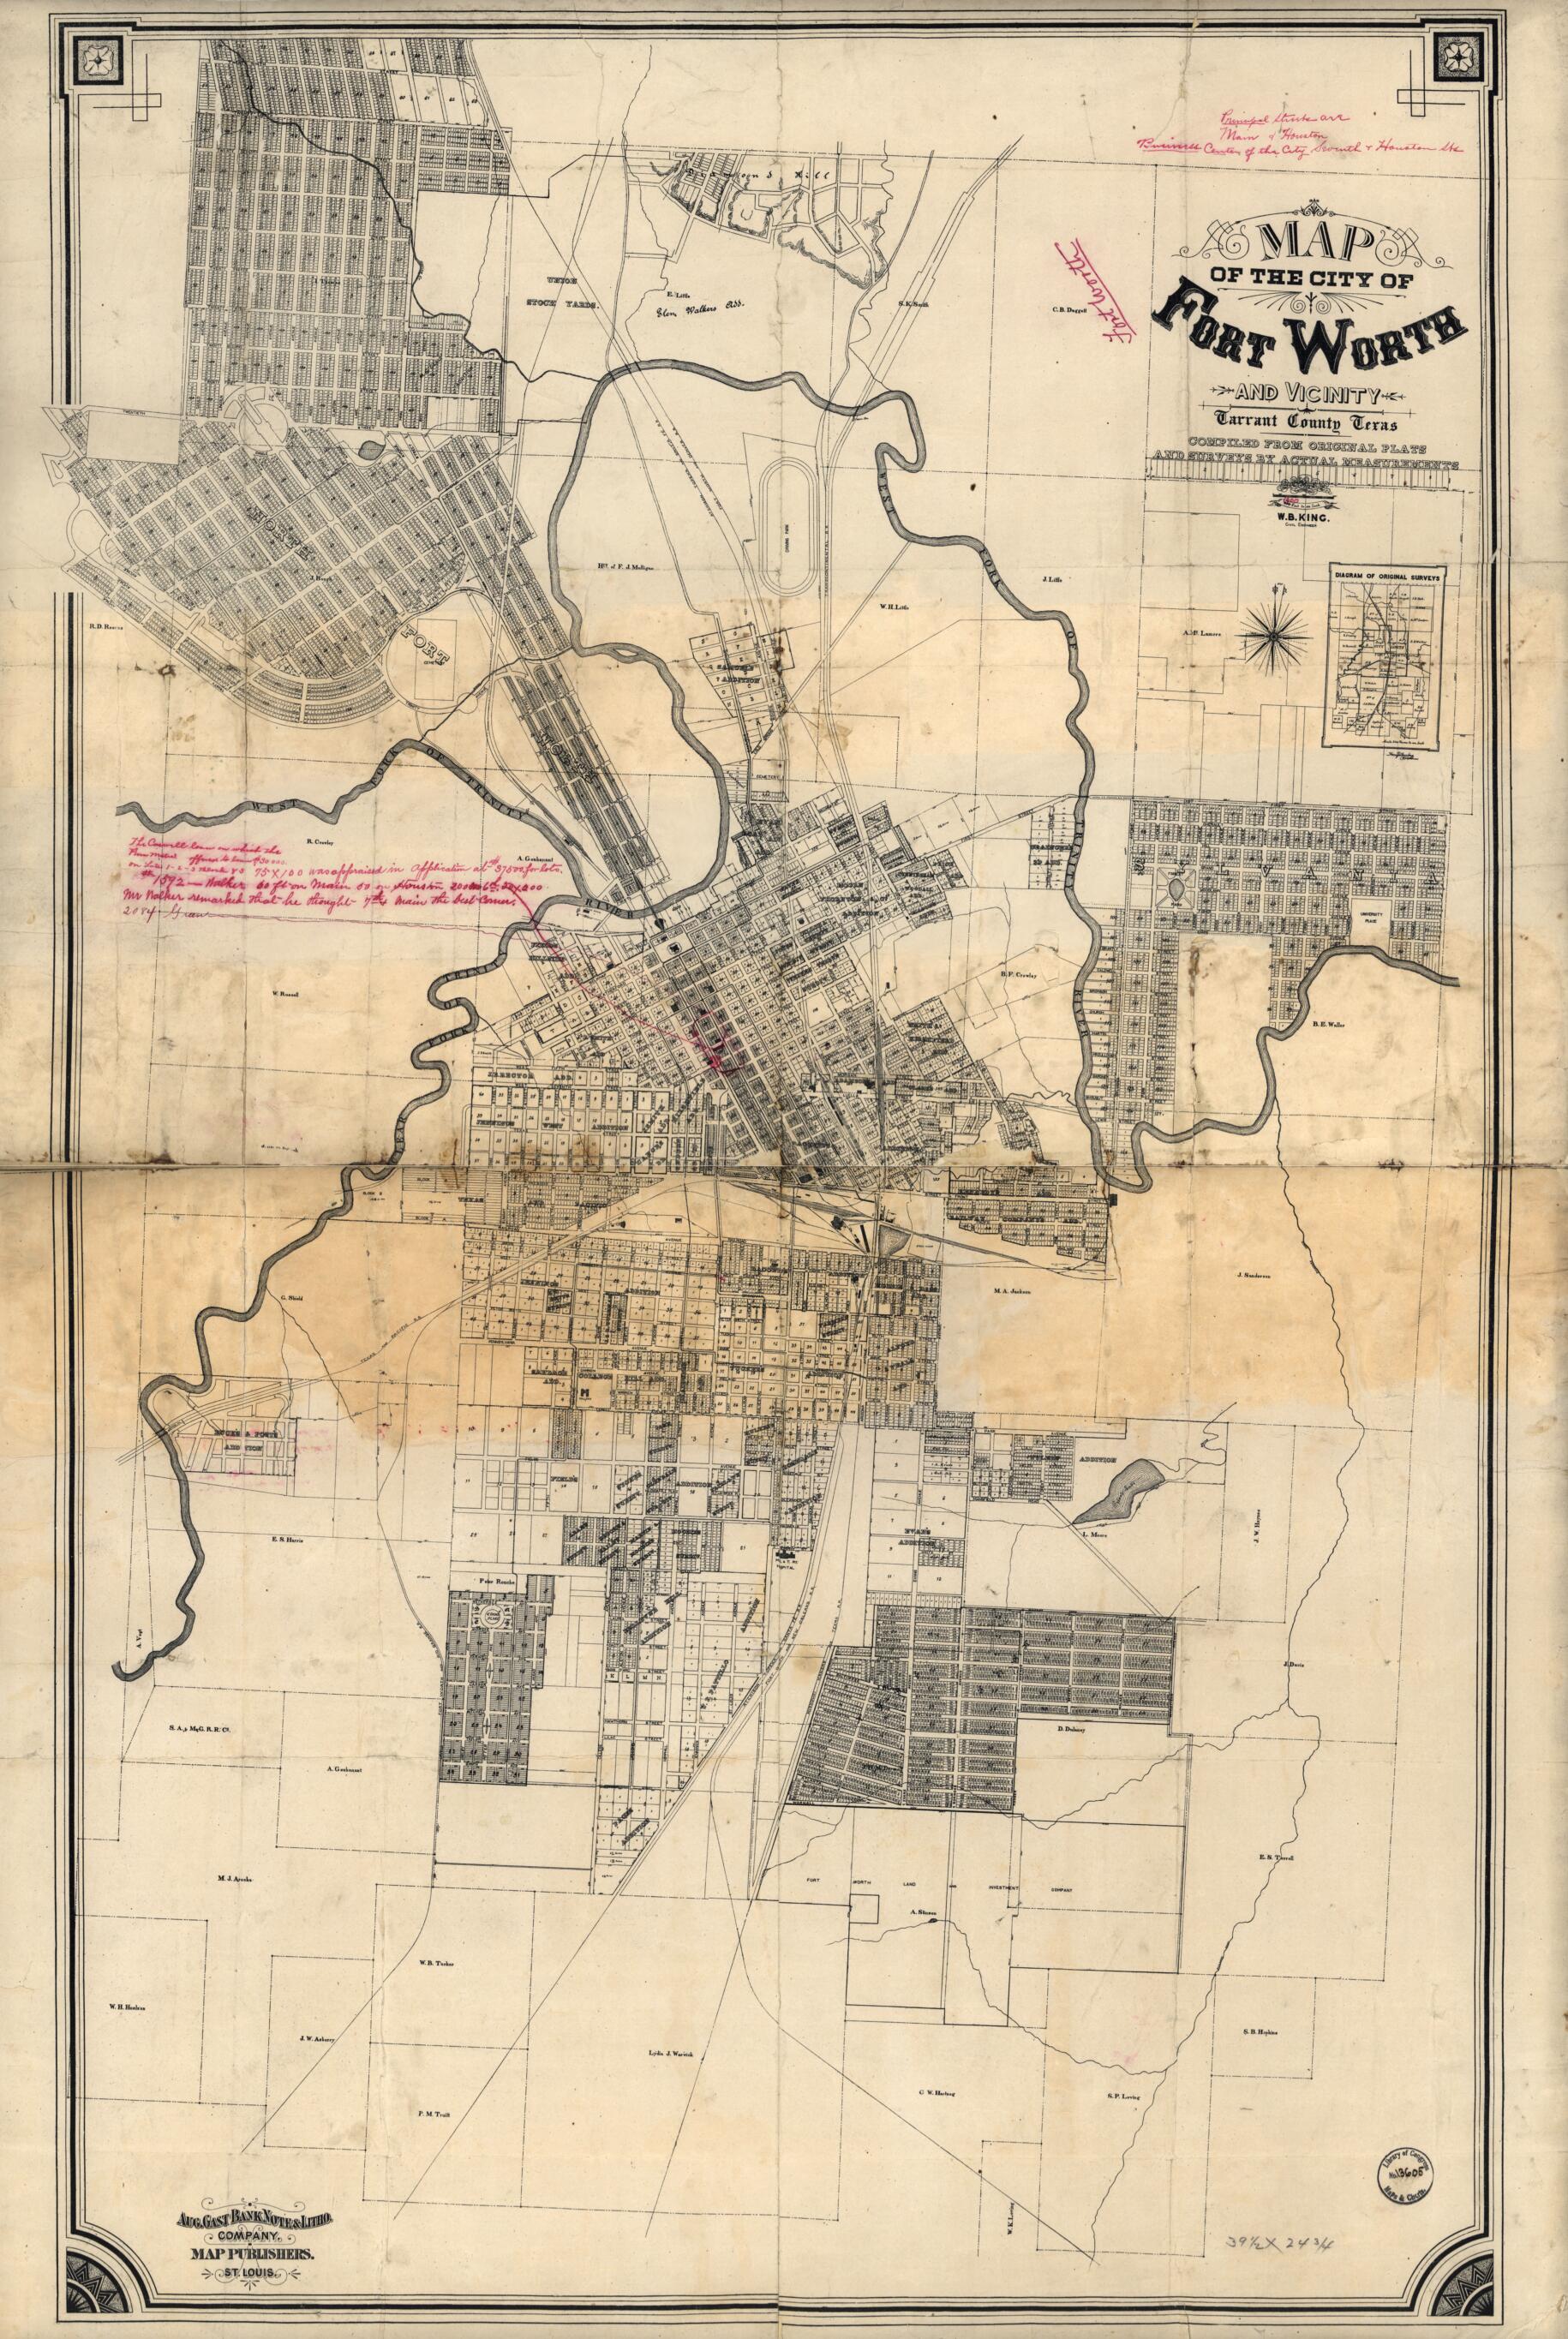 This old map of Map of the City of Fort Worth and Vicinity from 1880 was created by W. B. King in 1880